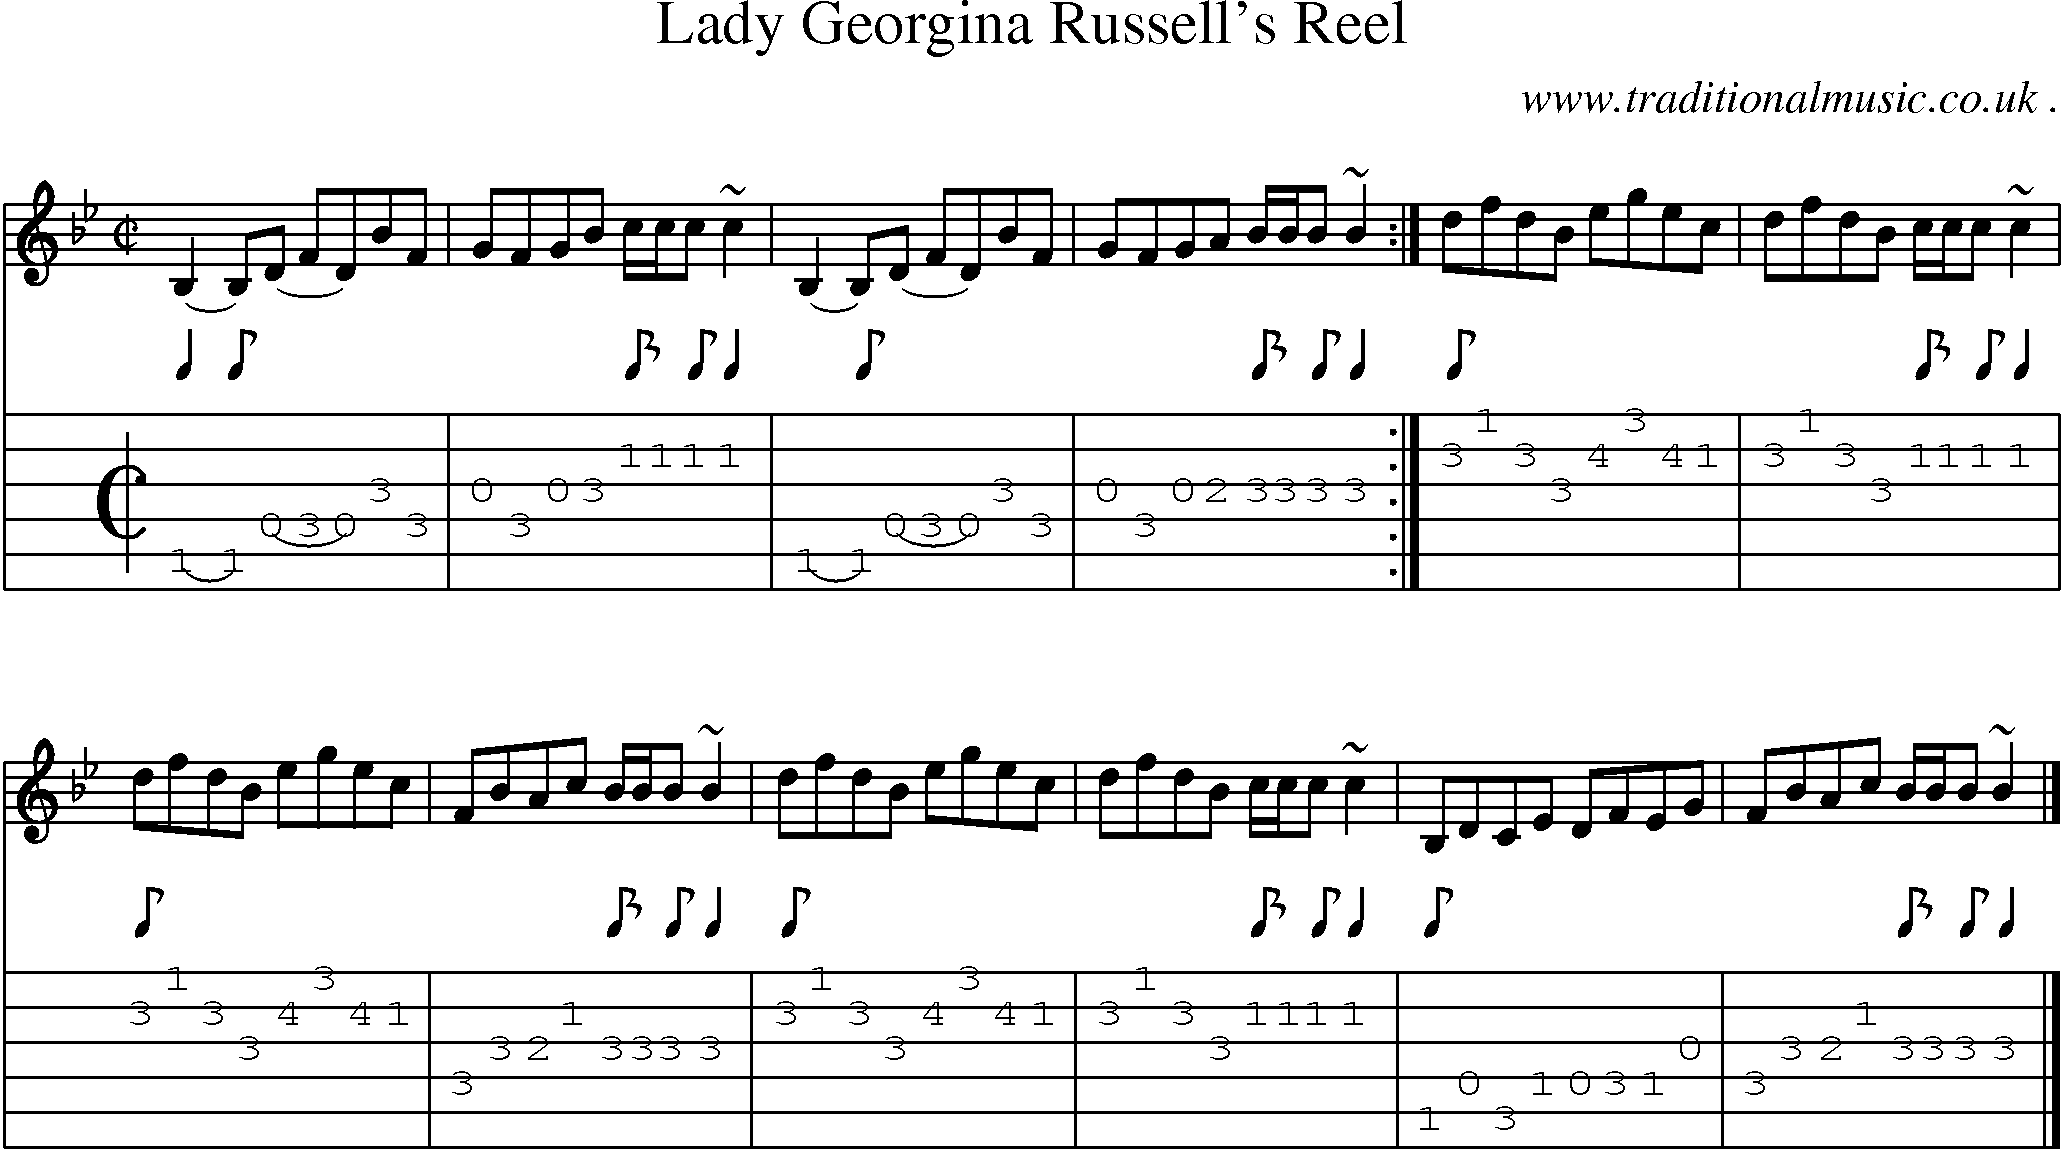 Sheet-music  score, Chords and Guitar Tabs for Lady Georgina Russells Reel